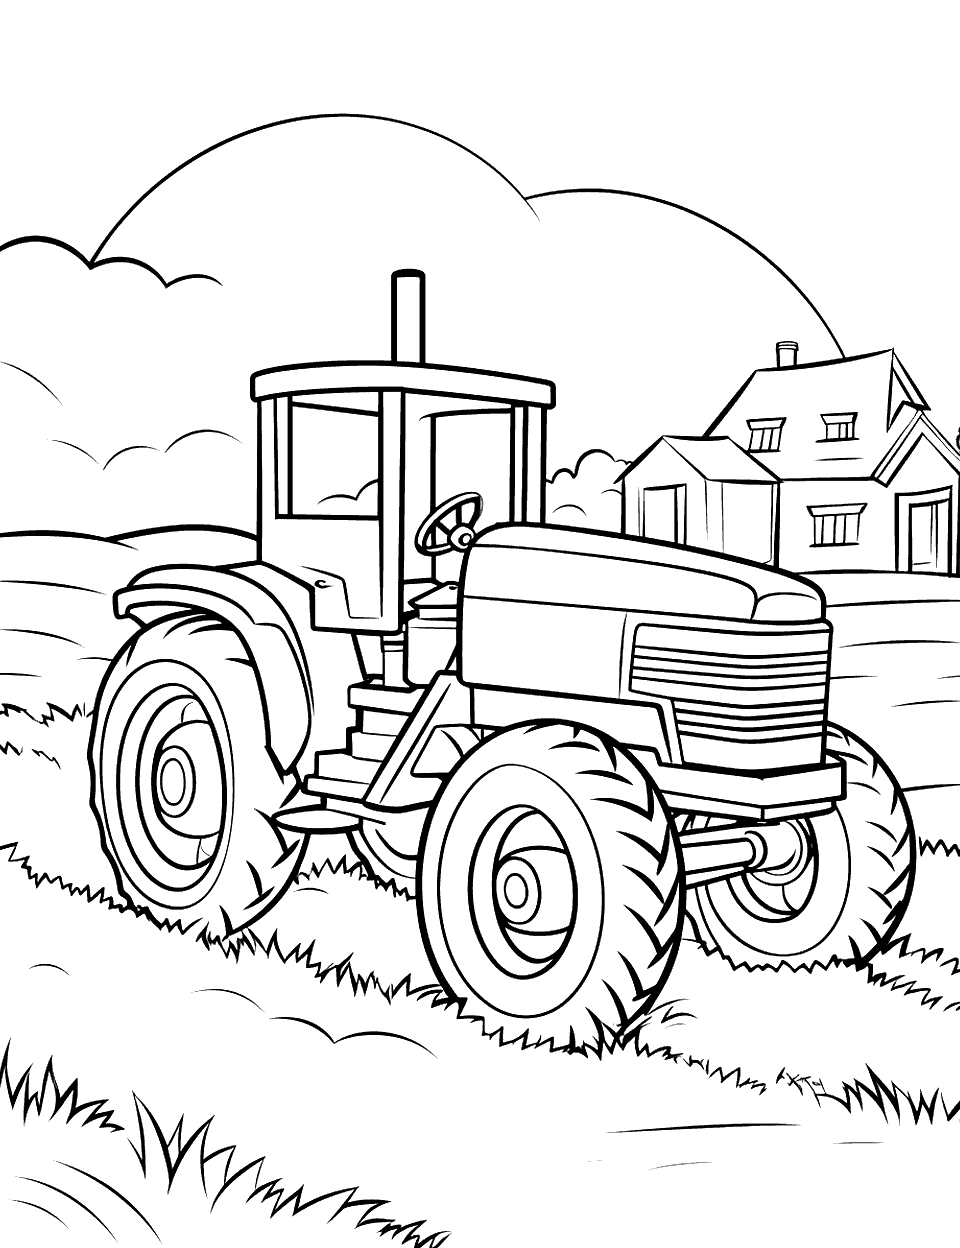 CAT Tractor and Farm Coloring Page - It is a classic scene with a CAT-style tractor and an old-style farm in the background.